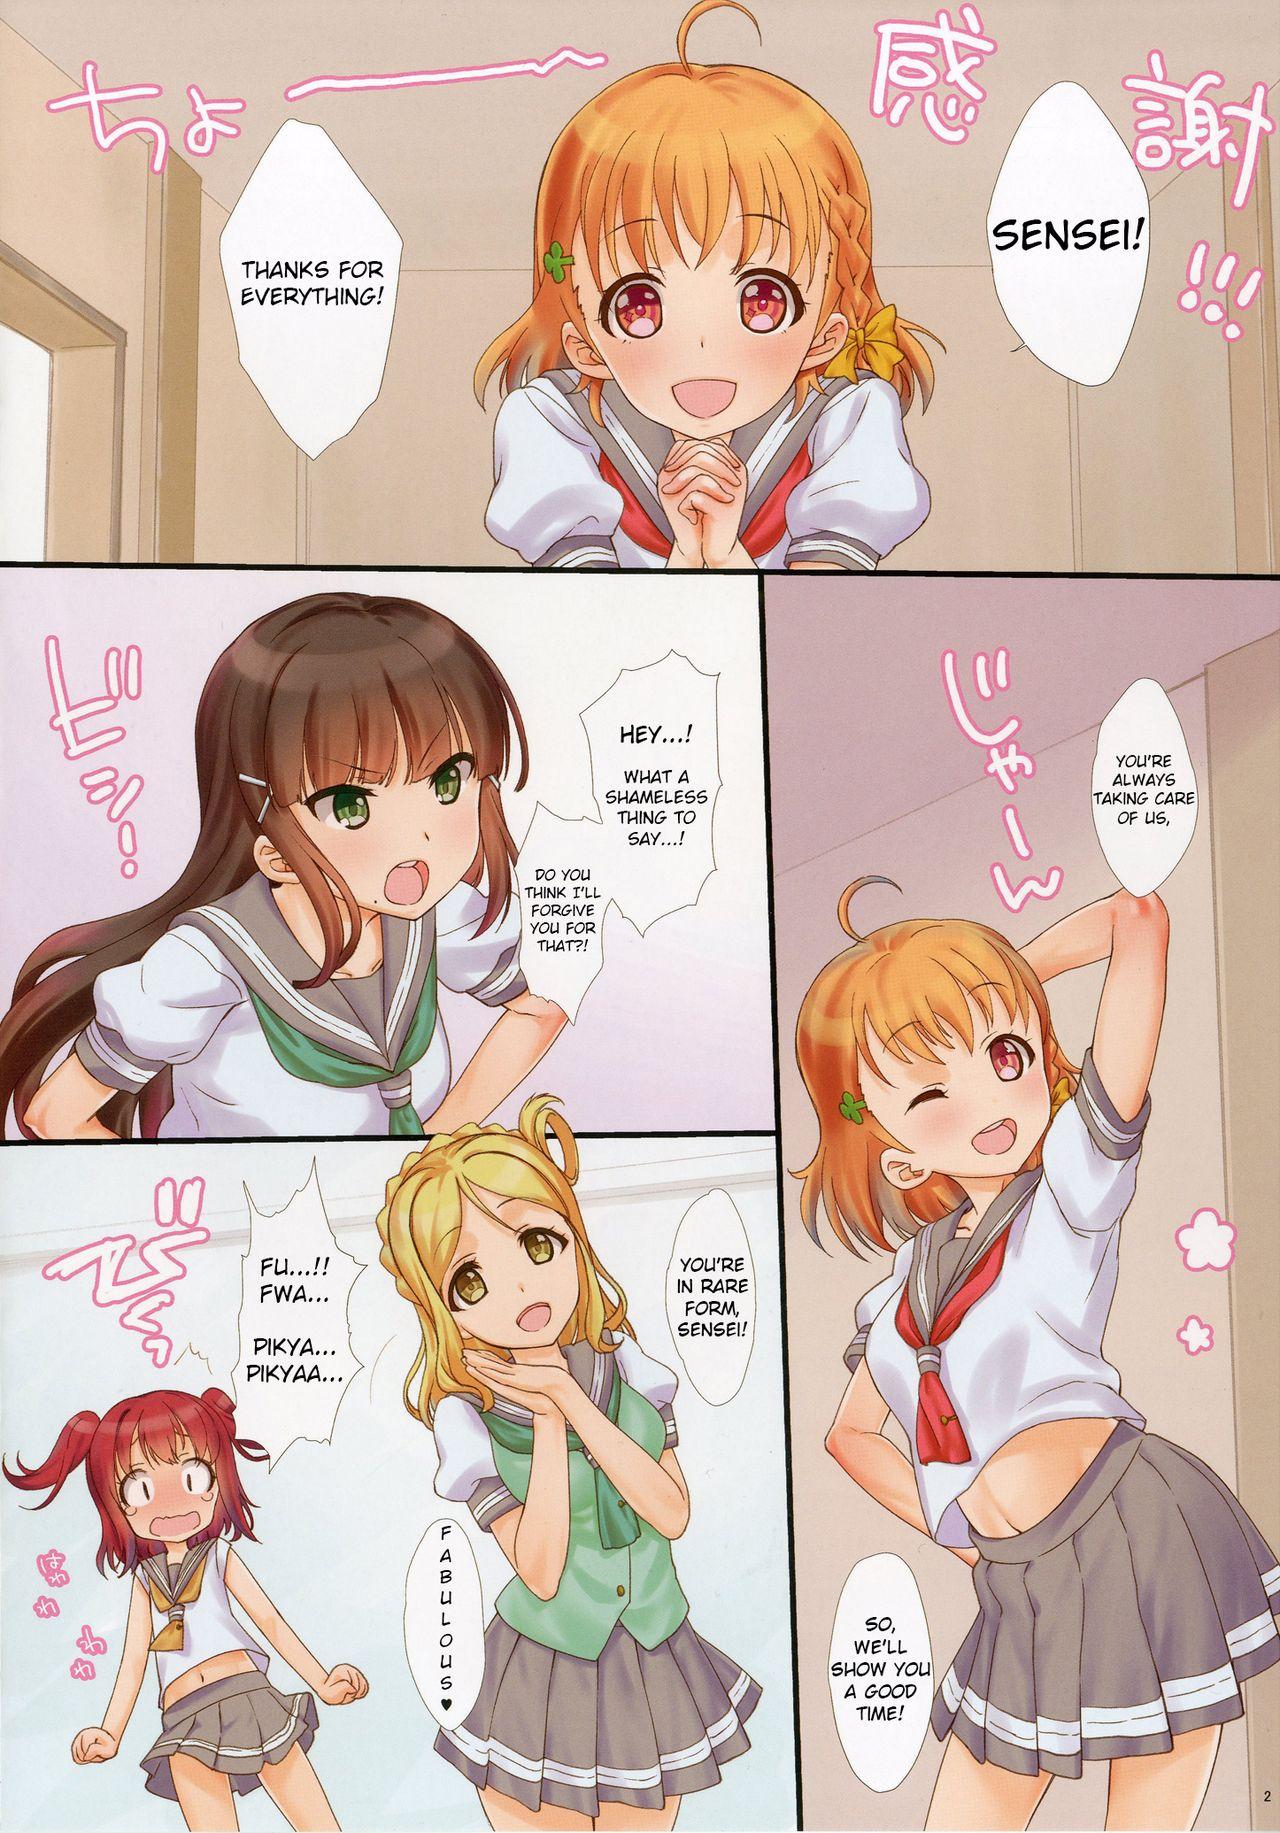 Chibola A HAPPY LOVE LOVE LIFE! - Love live sunshine Pigtails - Page 2